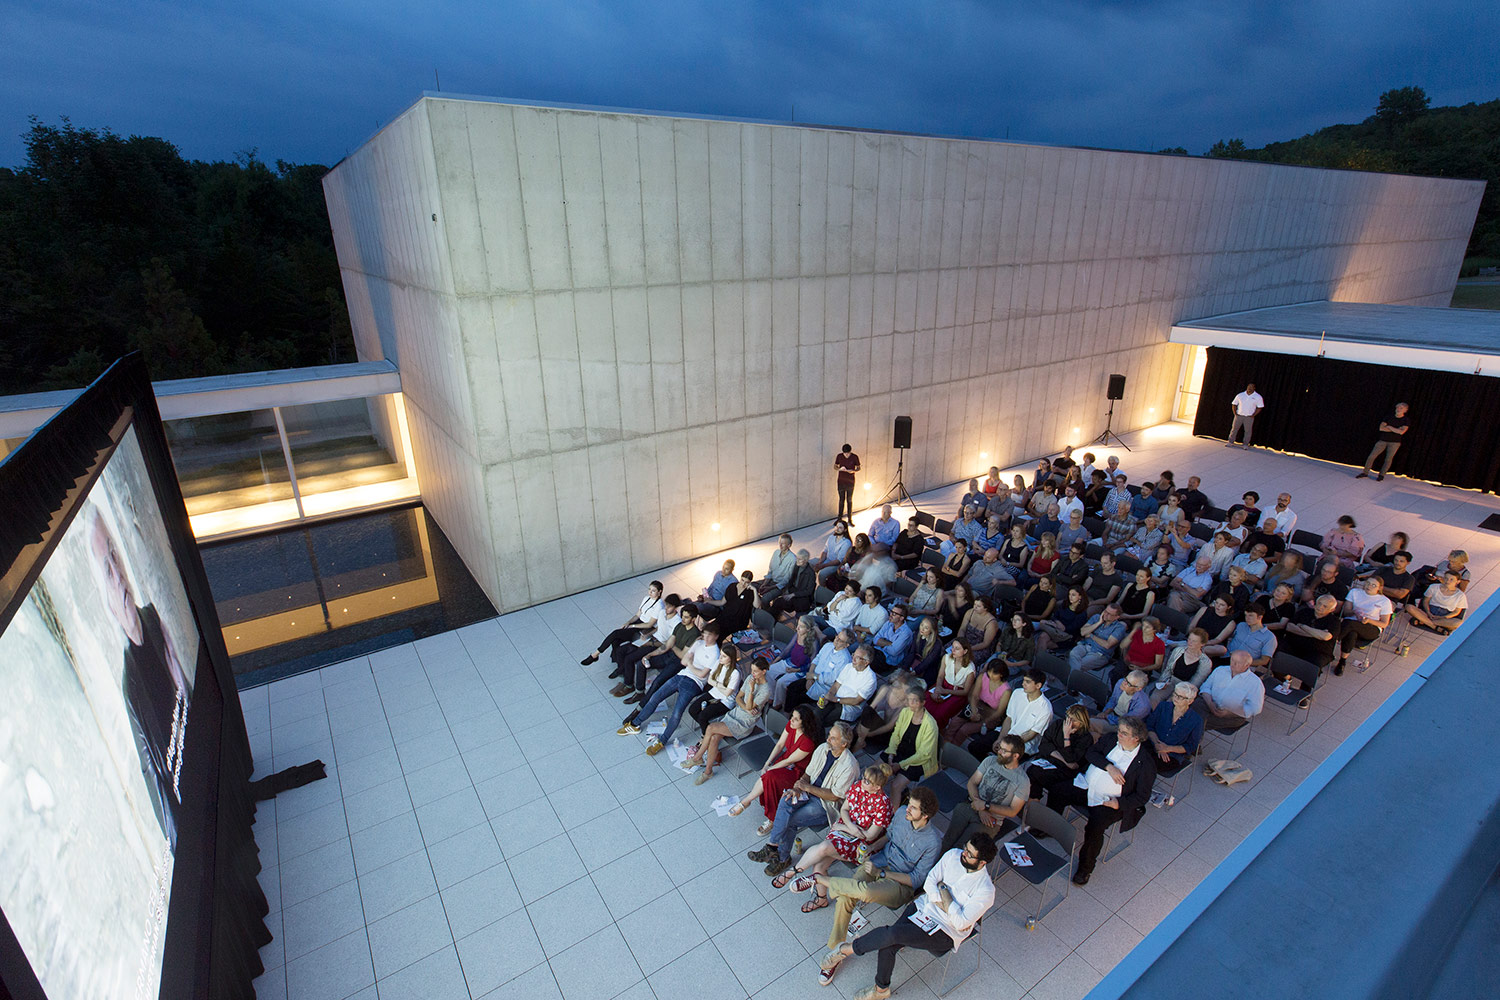 Art-collectors Nancy Olnick and Giorgio Spanu needed expert acousticians for their Magazzino Italian Art collection museum screenings in NY, they engaged WSDG to recommend and integrate a comprehensive equipment package. Roof Viewing 1.